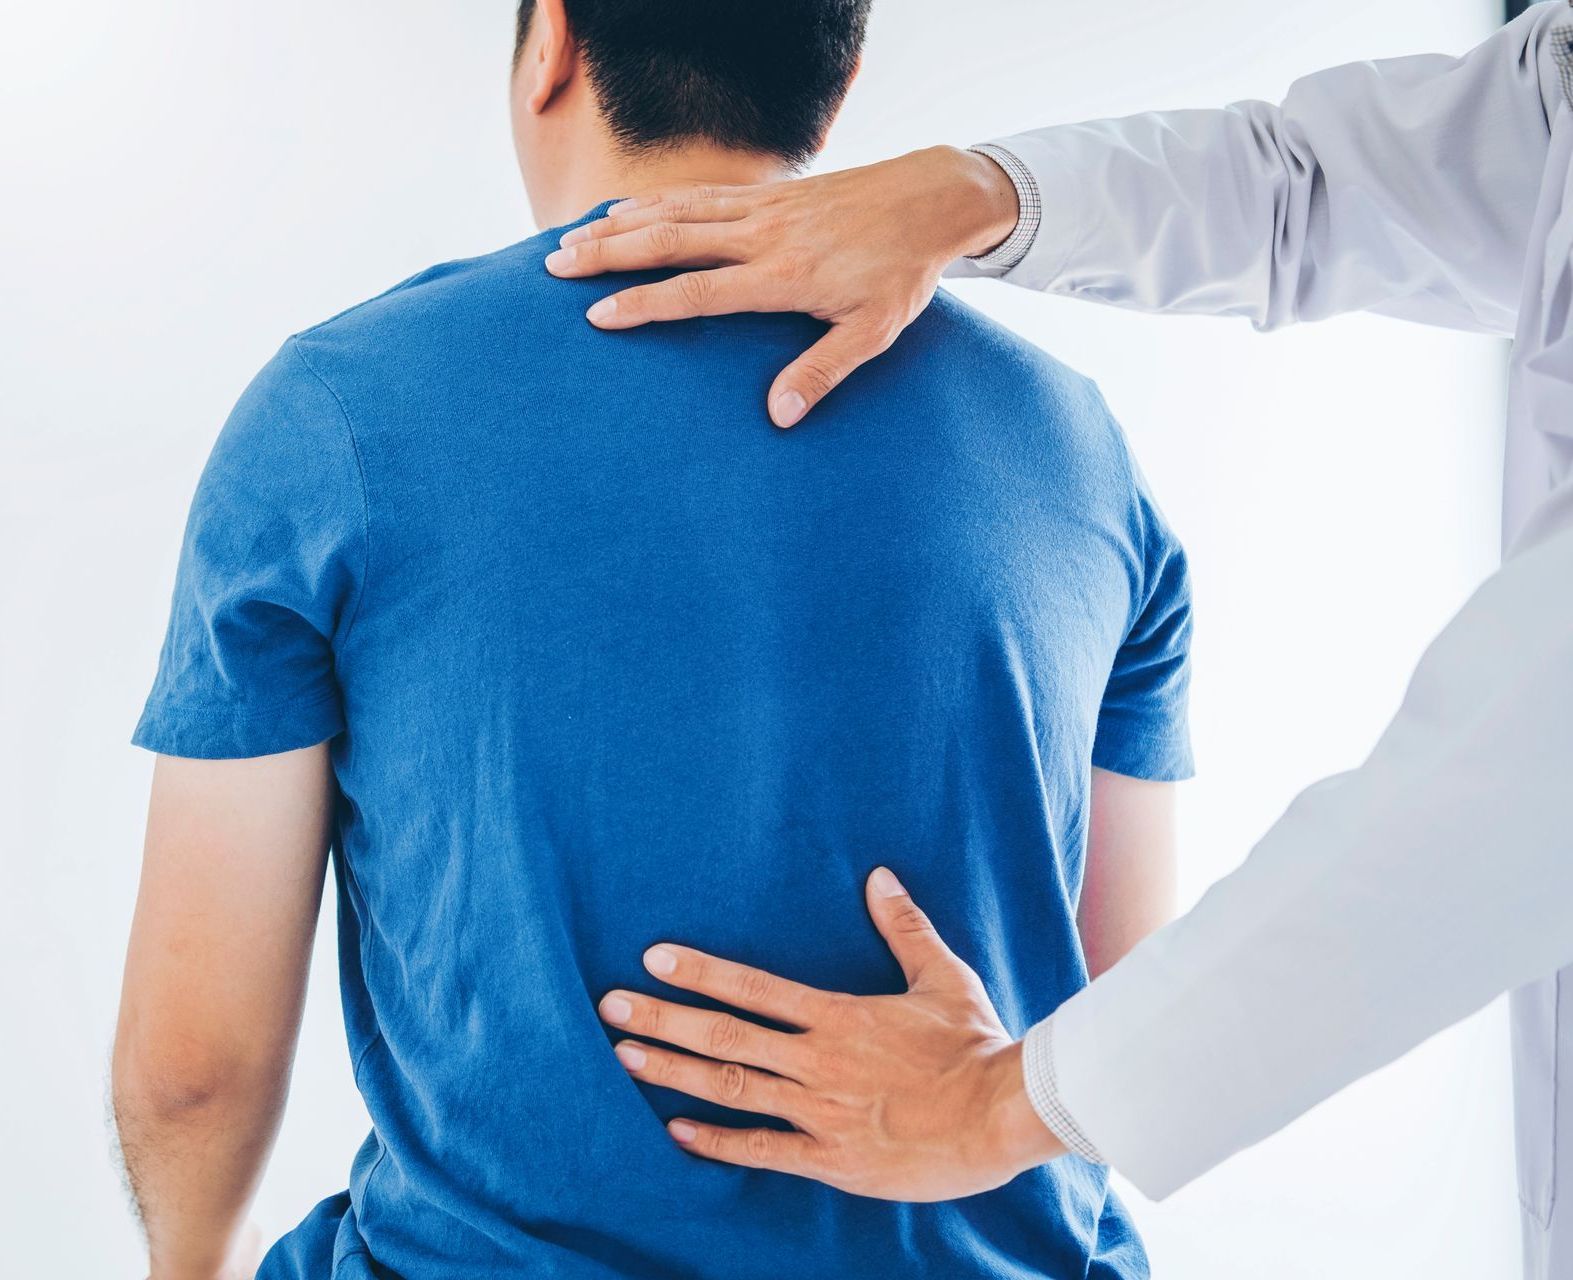 Chiropractor in St. Charles adjusting a patients neck